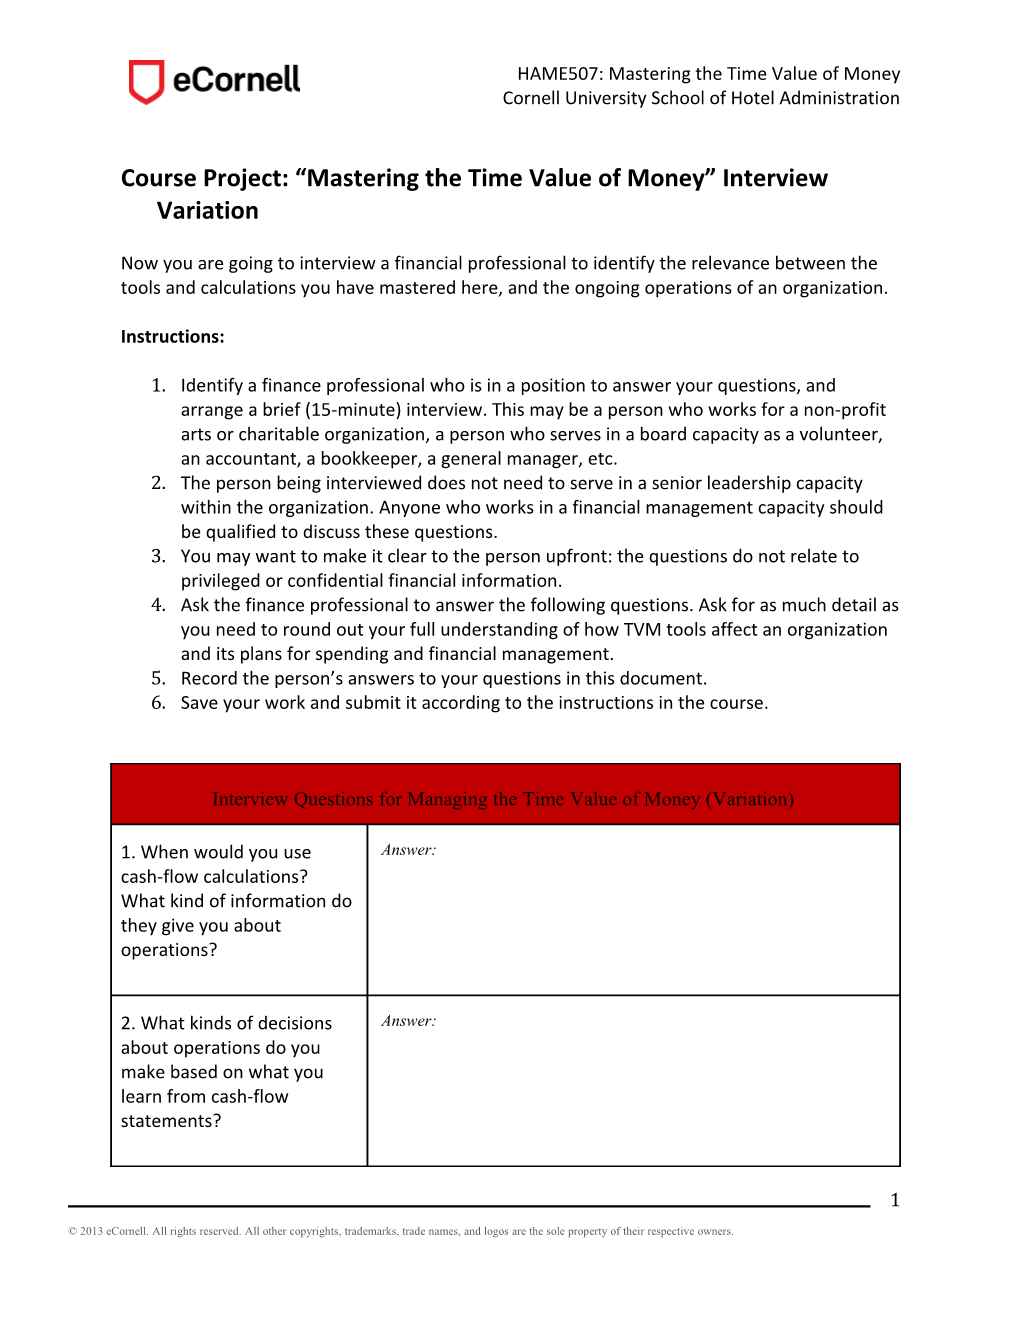 Course Project: Mastering the Time Value of Money Interview Variation